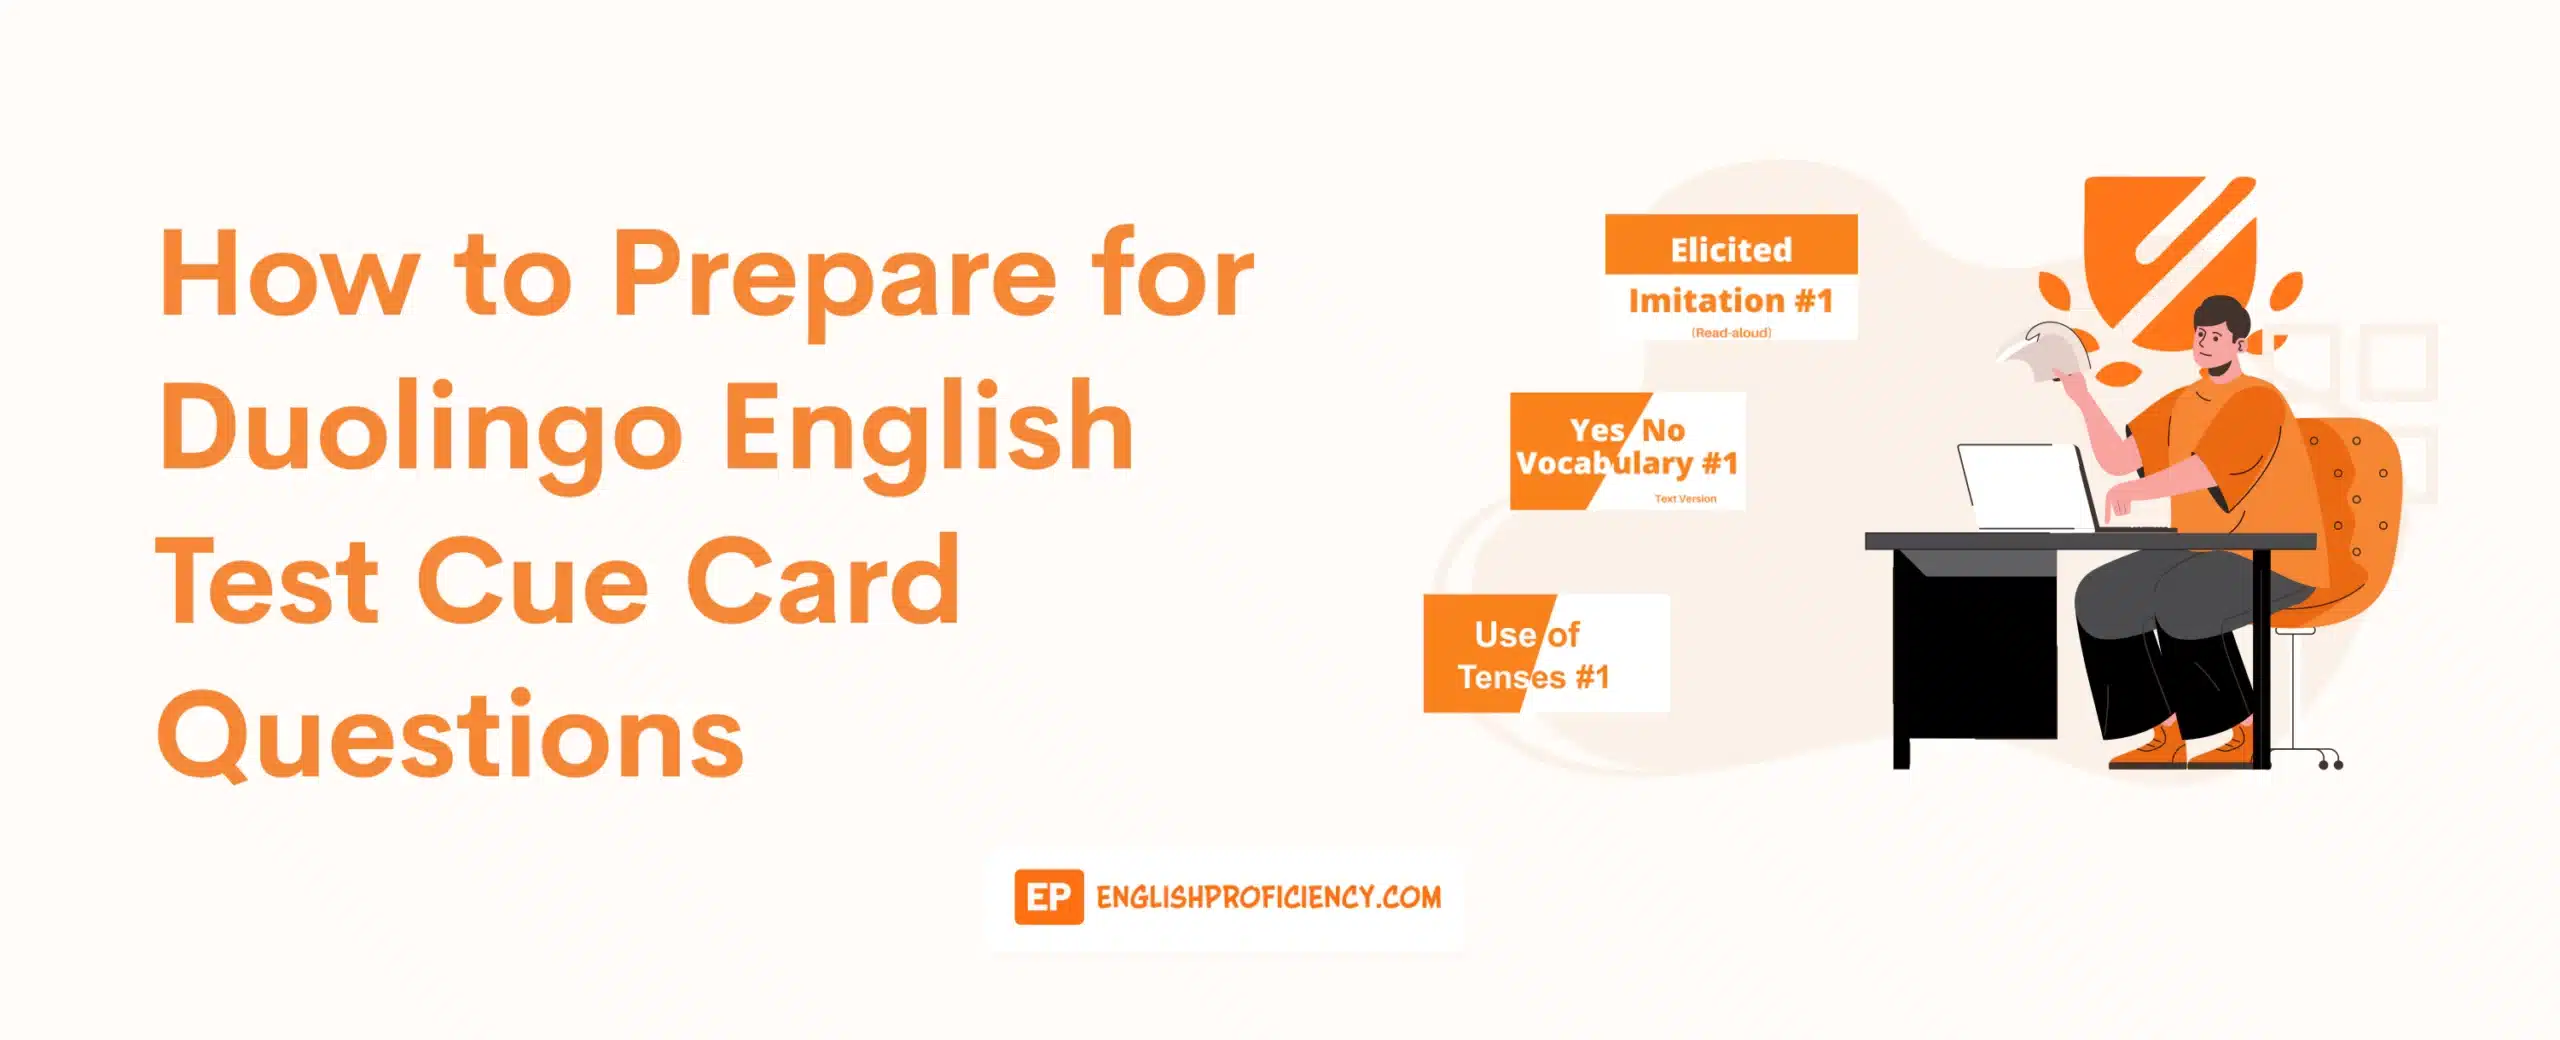 How to Prepare for Duolingo English Test Cue Card Questions